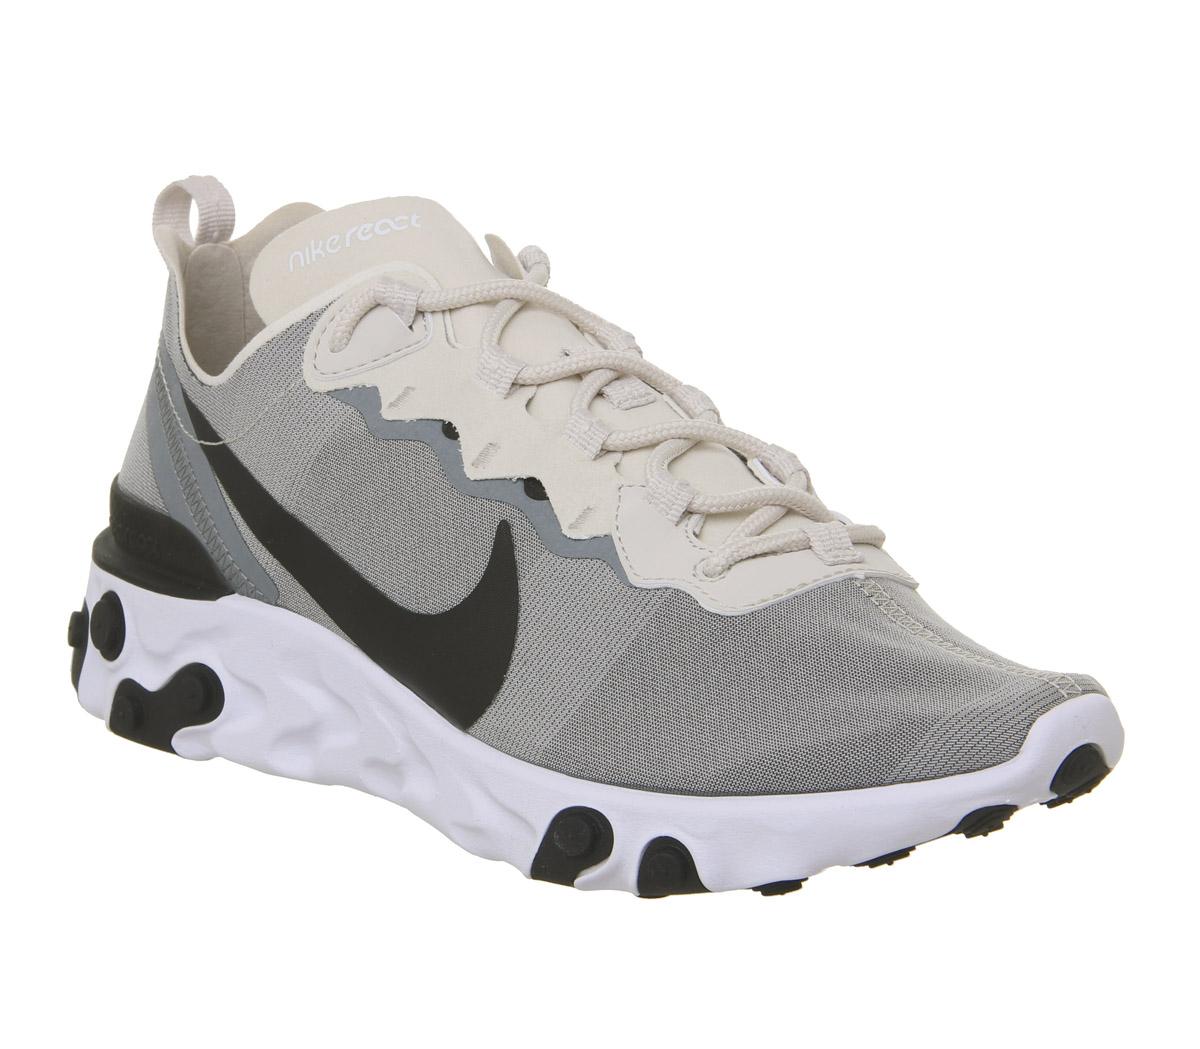 Nike React Element 55 Trainers Light 